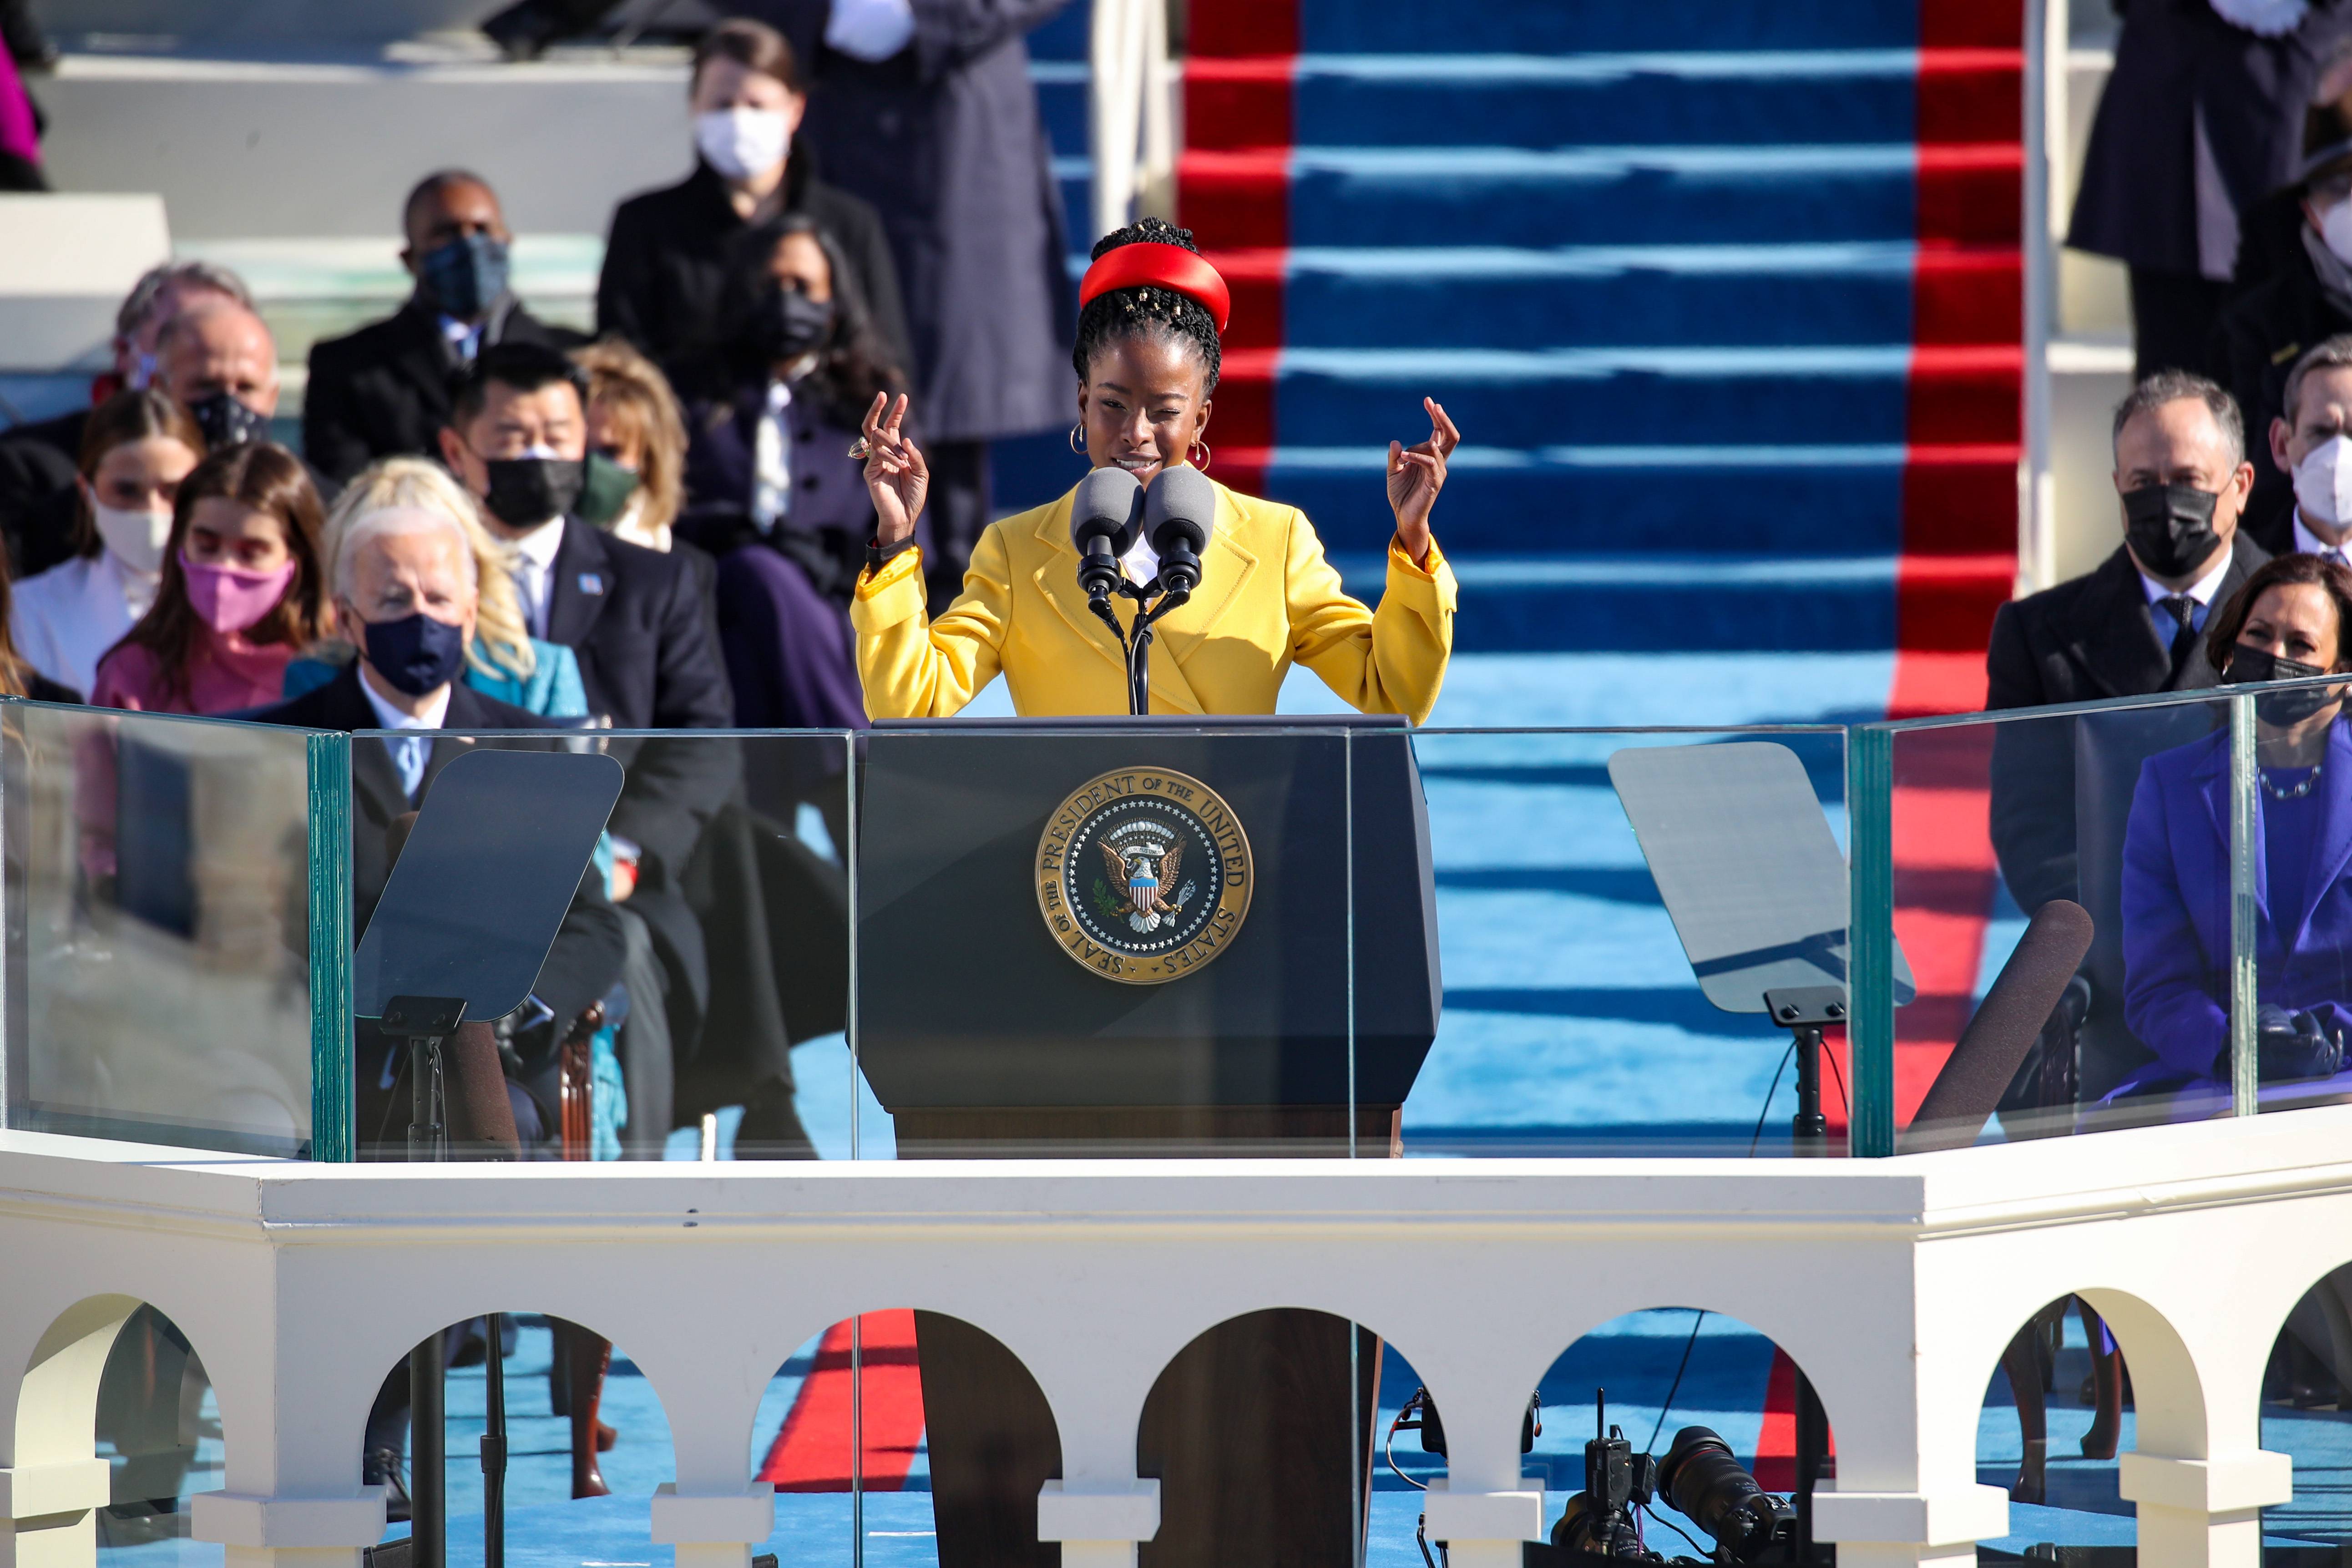 WASHINGTON, DC - JANUARY 20: Youth Poet Laureate Amanda Gorman speaks at the inauguration of U.S. President Joe Biden on the West Front of the U.S. Capitol on January 20, 2021 in Washington, DC.  During today's inauguration ceremony Joe Biden becomes the 46th president of the United States. (Photo by Rob Carr/Getty Images)